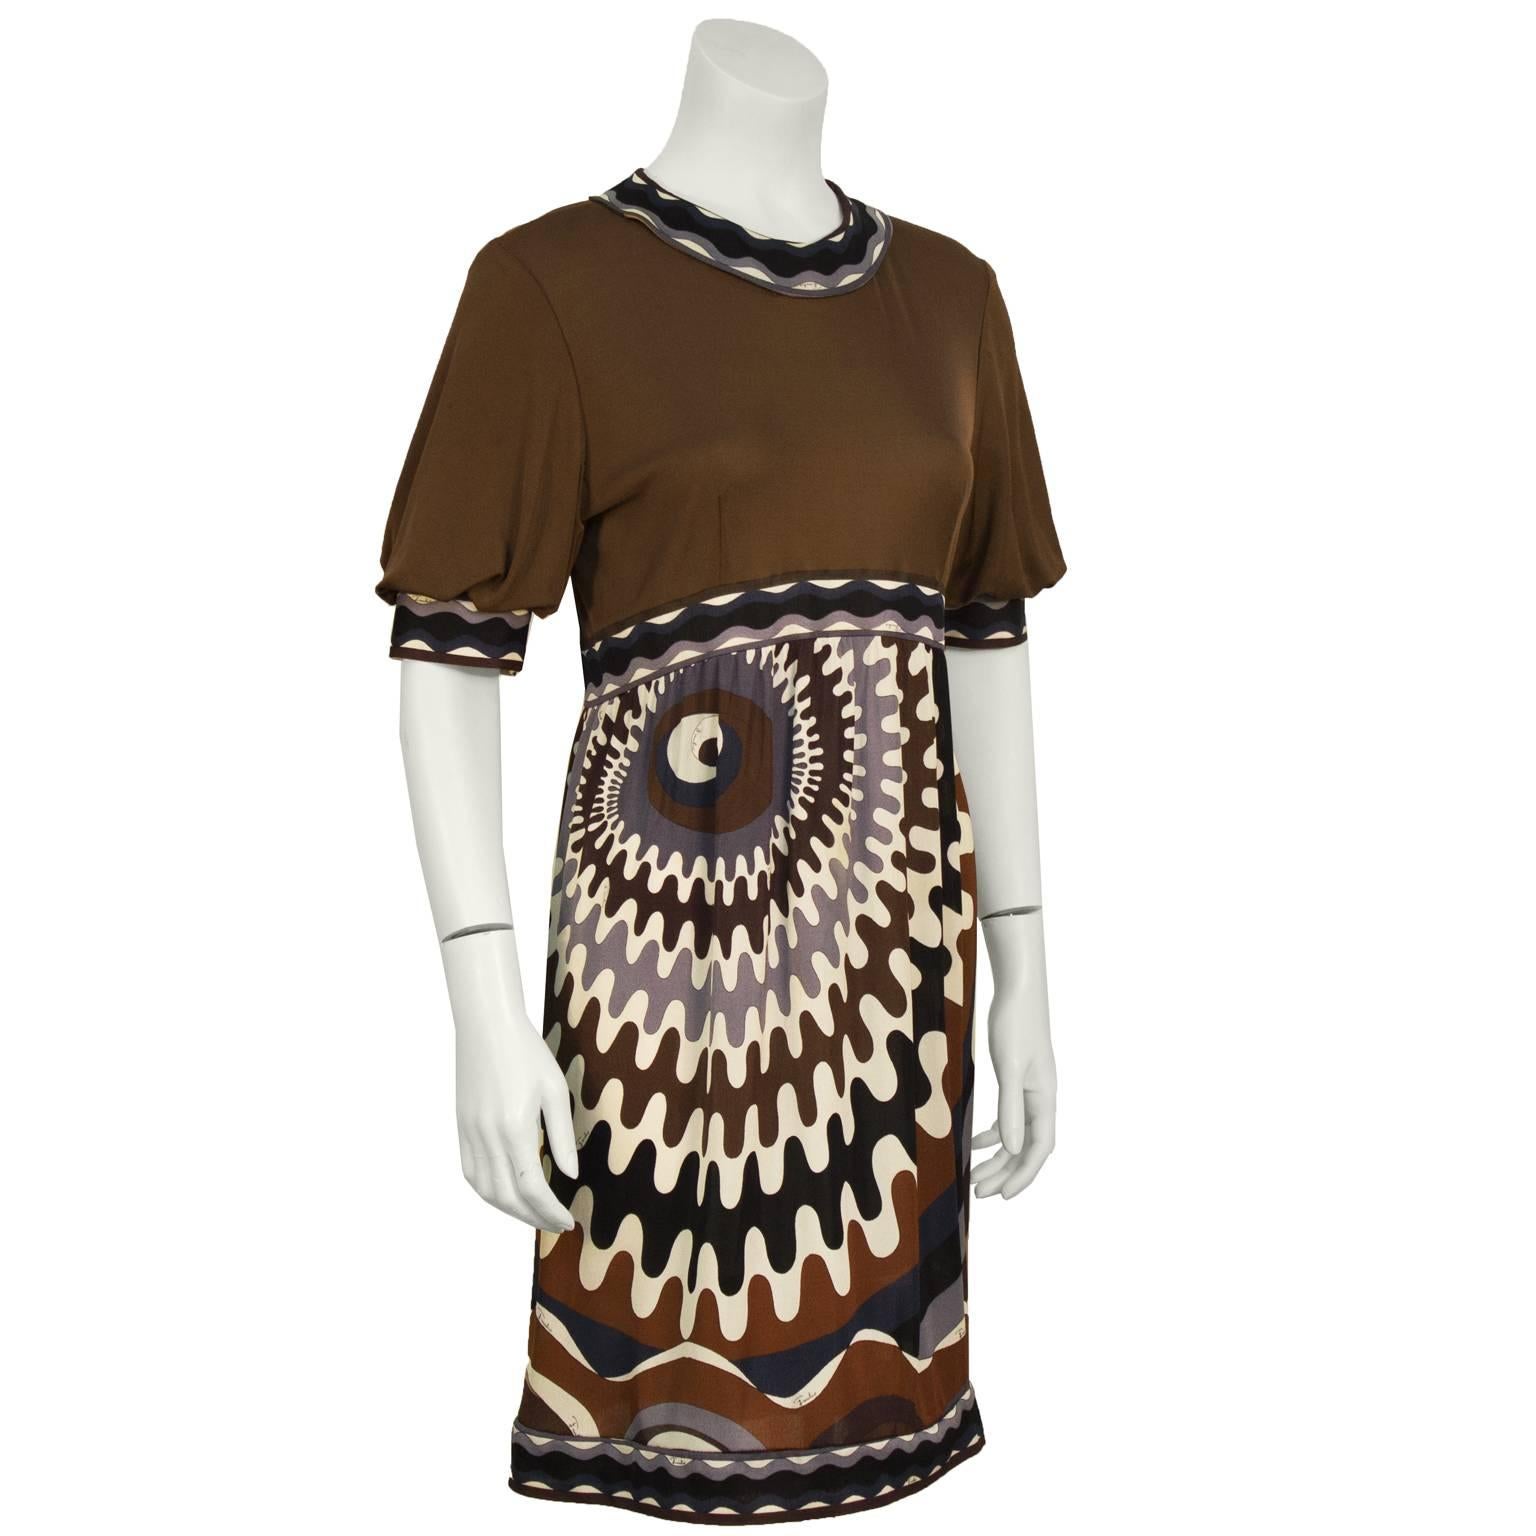 Emilio Pucci brown grey and white printed silk jersey mini dress from the 1960’s. The dress features a solid bodice with Pucci print banding at the neckline and at the empire waist, as well as the trim on the puff sleeves. The skirt falls to above